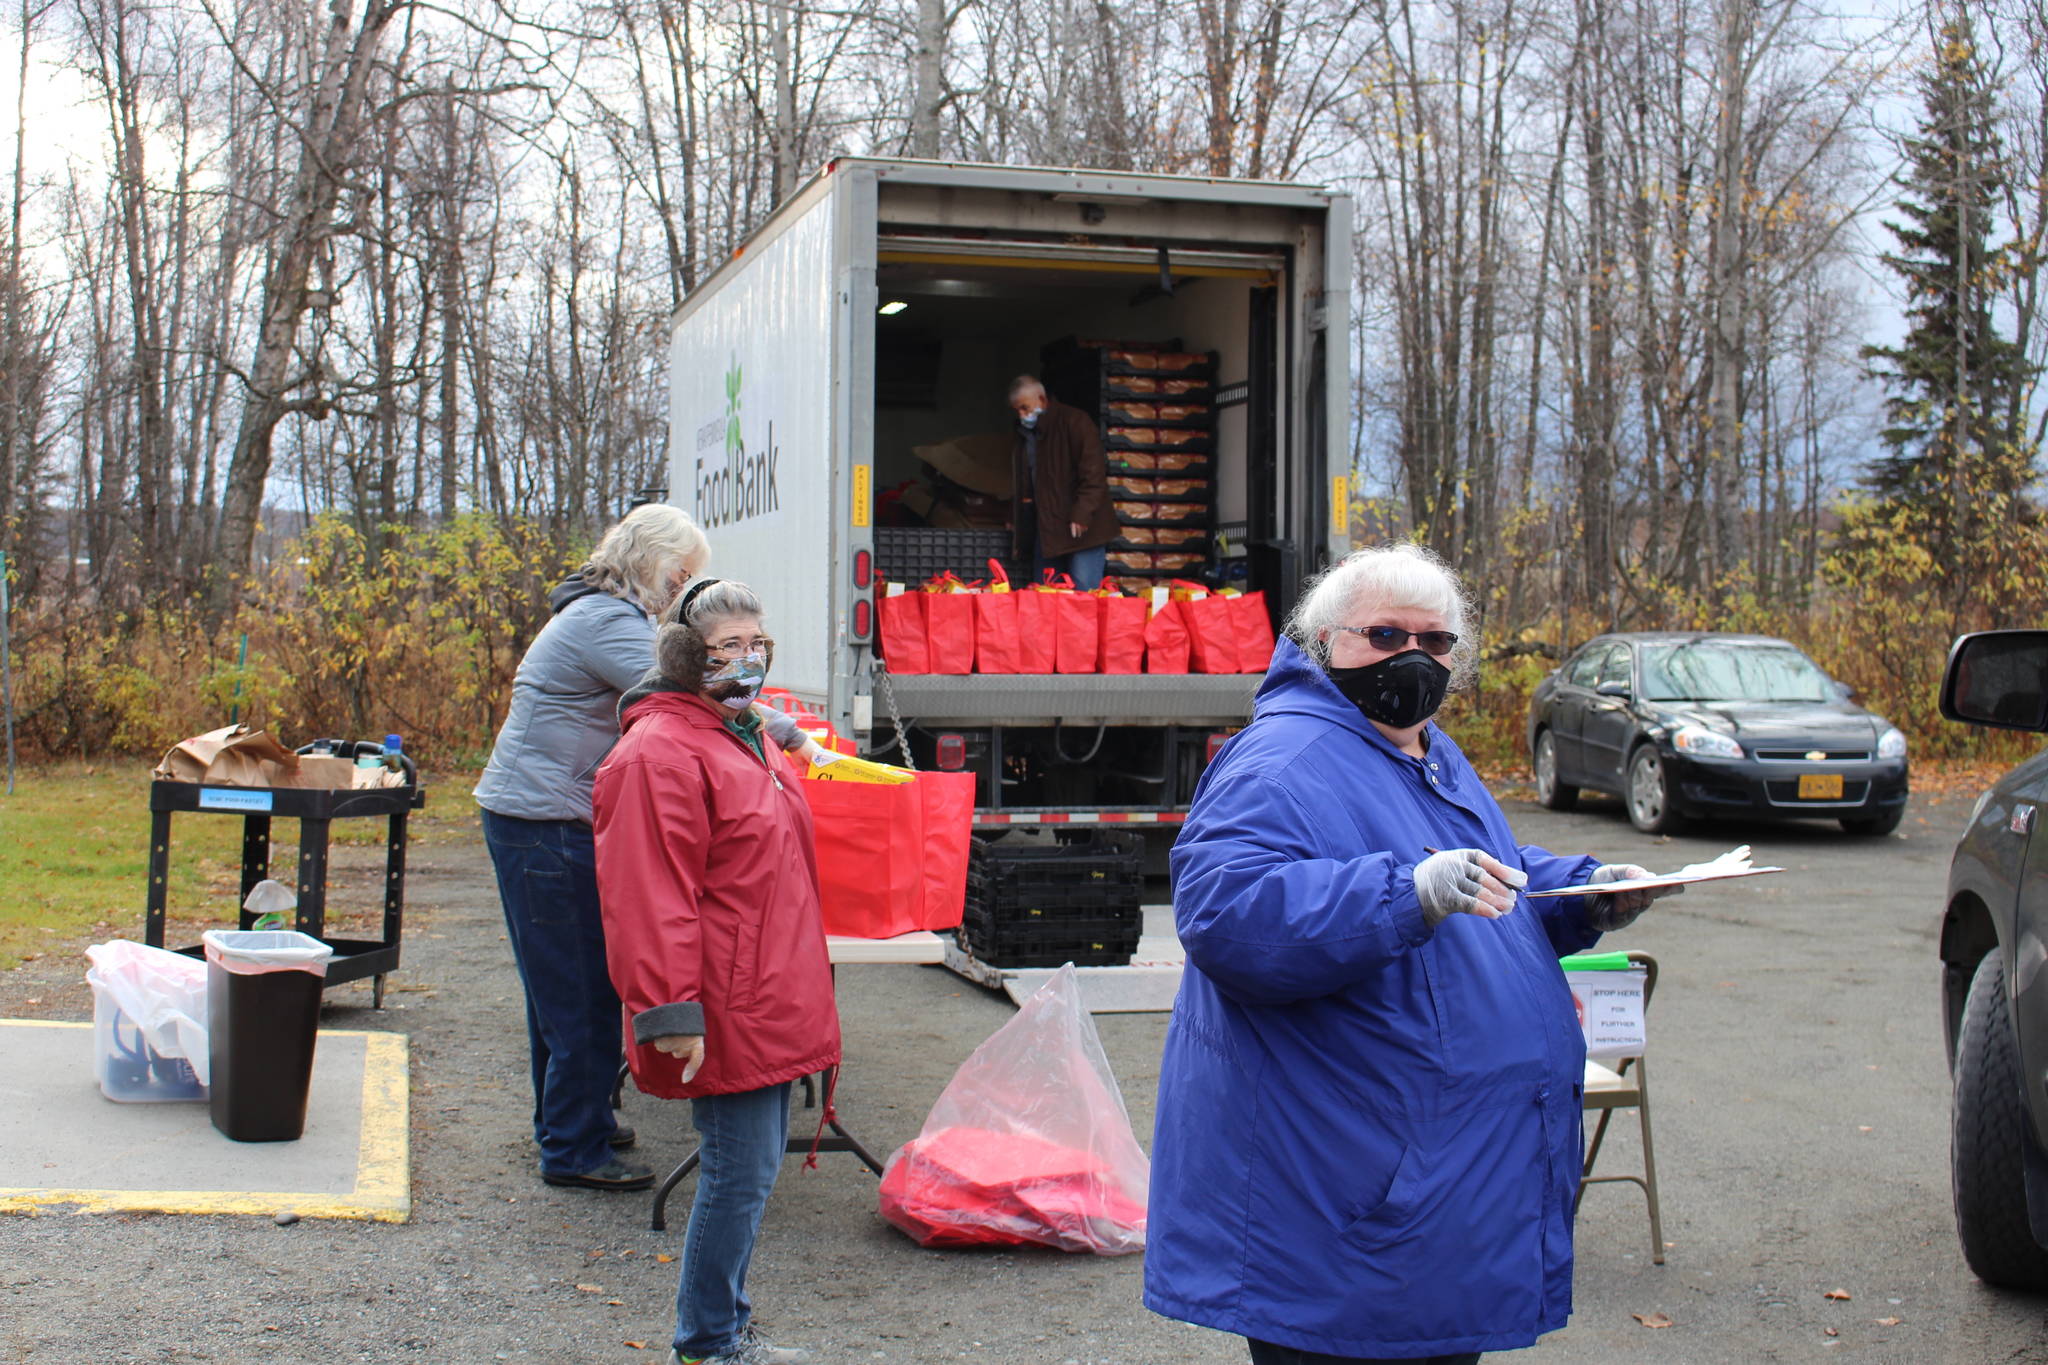 Volunteers distribute bags of food for Soldotna Residents thanks to a grant program from the city at the Soldotna United Methodist Church on Oct. 14, 2020. From left: Cosette Kilfoyle, Director of the Soldotna Food Pantry; Sandy Sandoval and Leroy Sandoval, Food Bank Volunteers; Kathy Carson, member of Christ Lutheran Church. (Photo by Brian Mazurek/Peninsula Clarion)